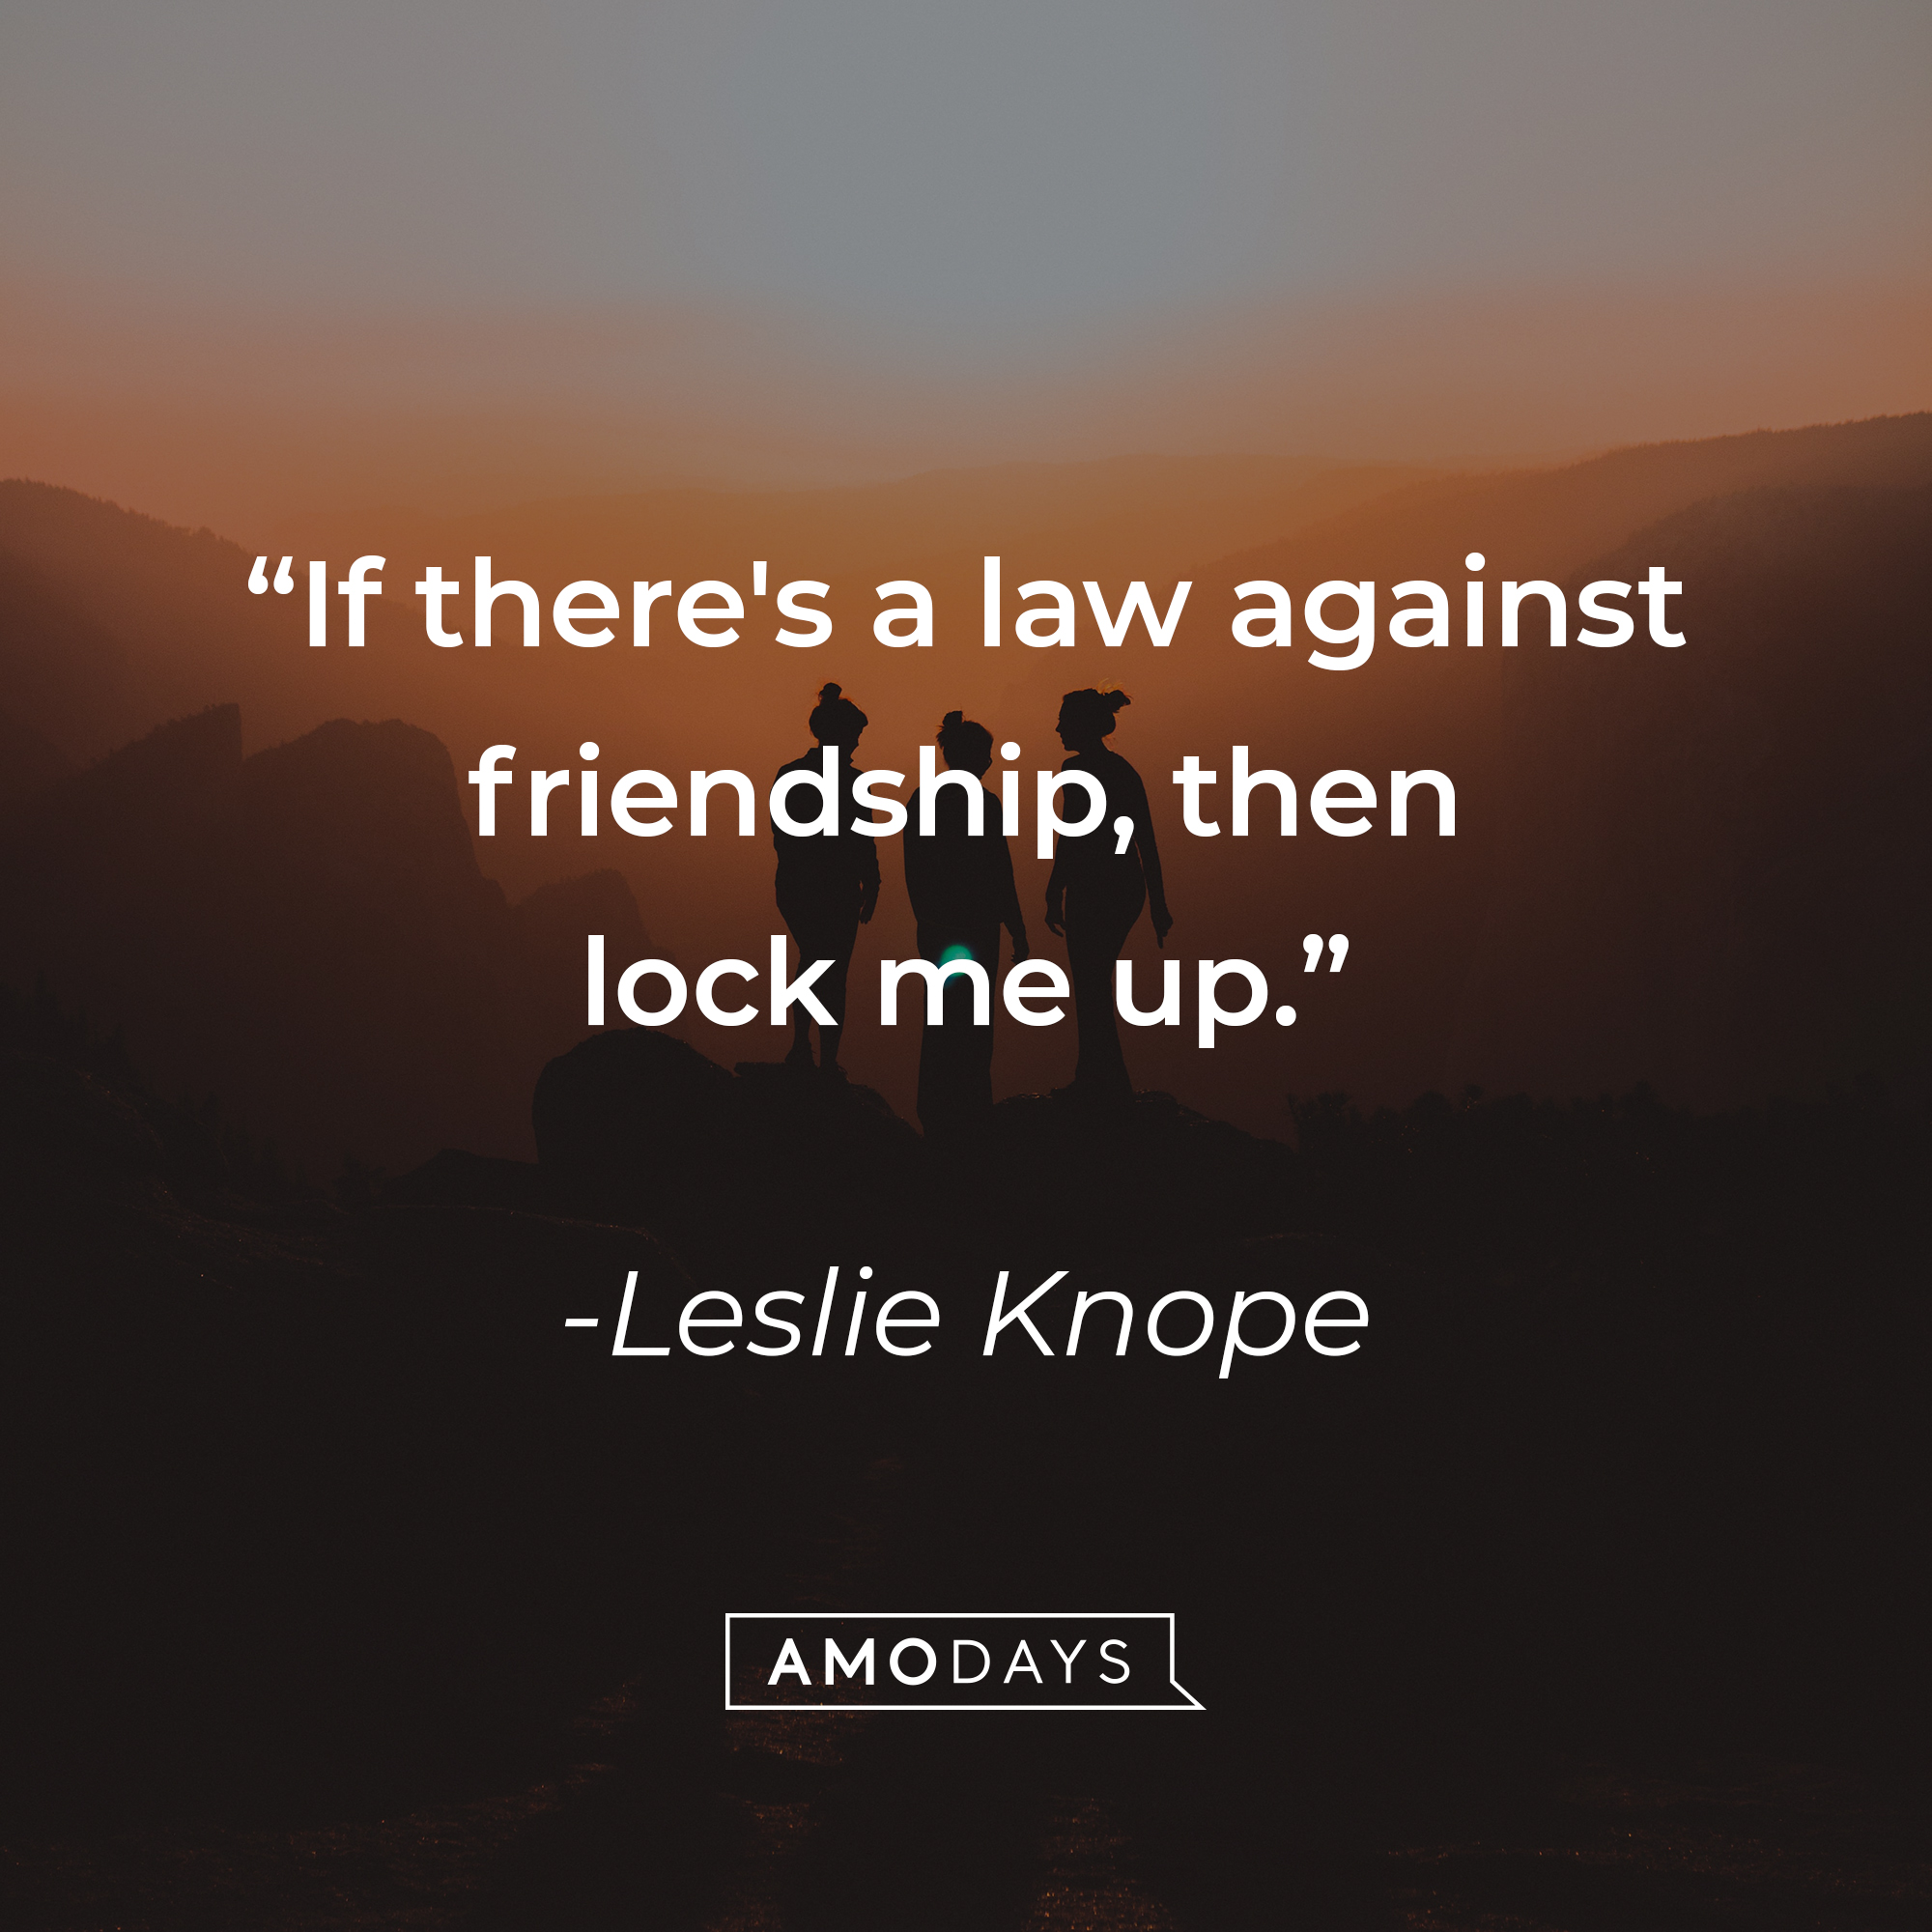 Leslie Knope's quote: "If there's a law against friendship, then lock me up." | Source: Unsplash